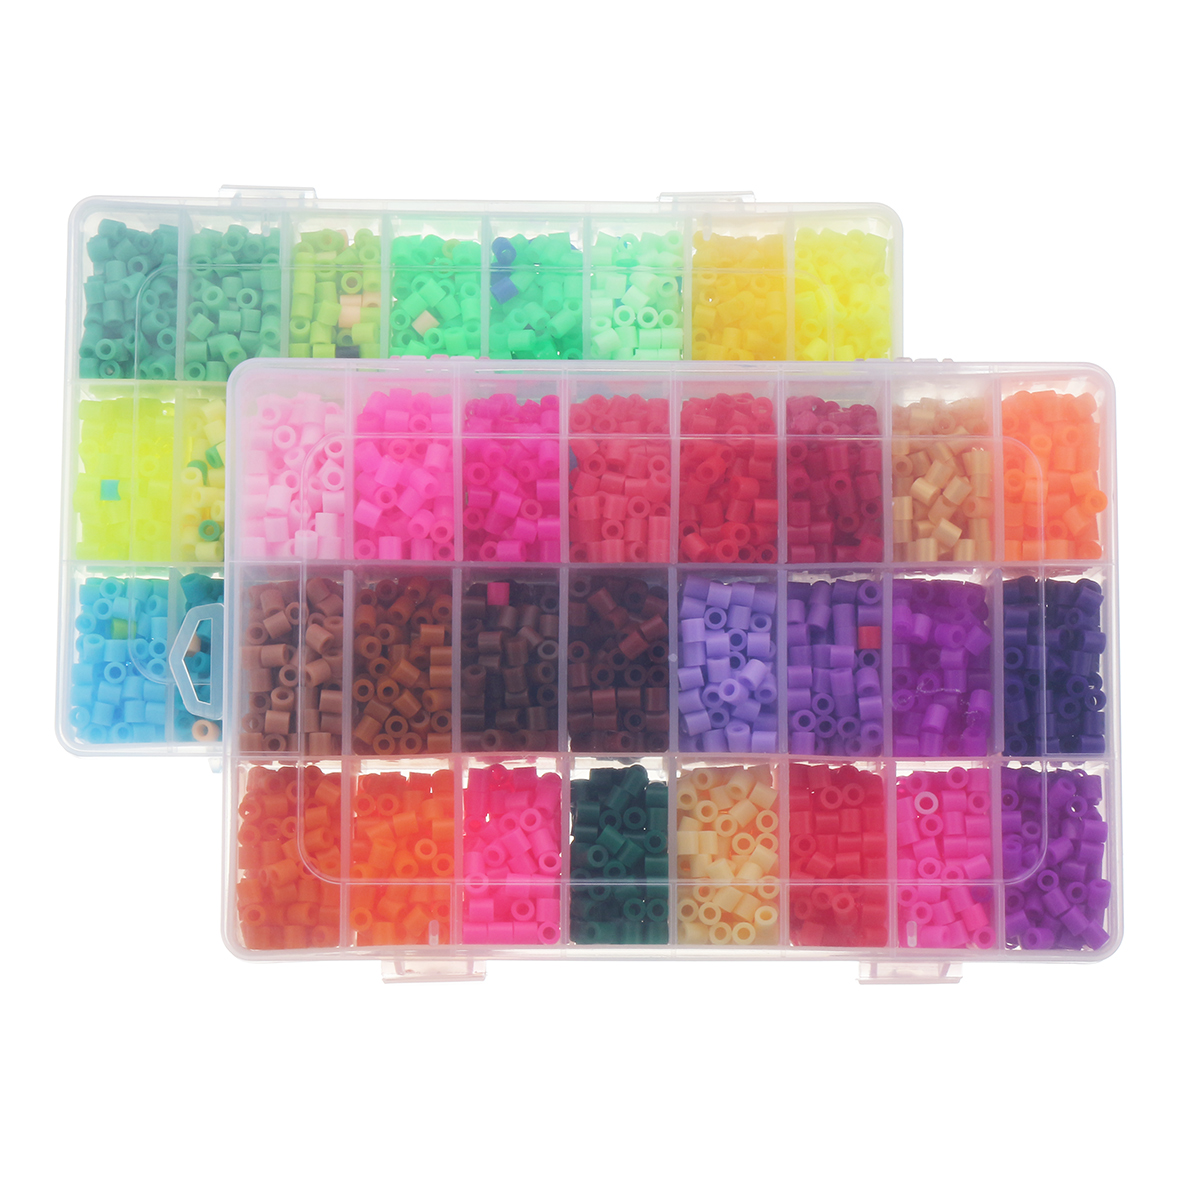 

5mm 48 Colors DIY Fuse Beads Toys Kids Creative Handmade Craft DIY Toy Gift